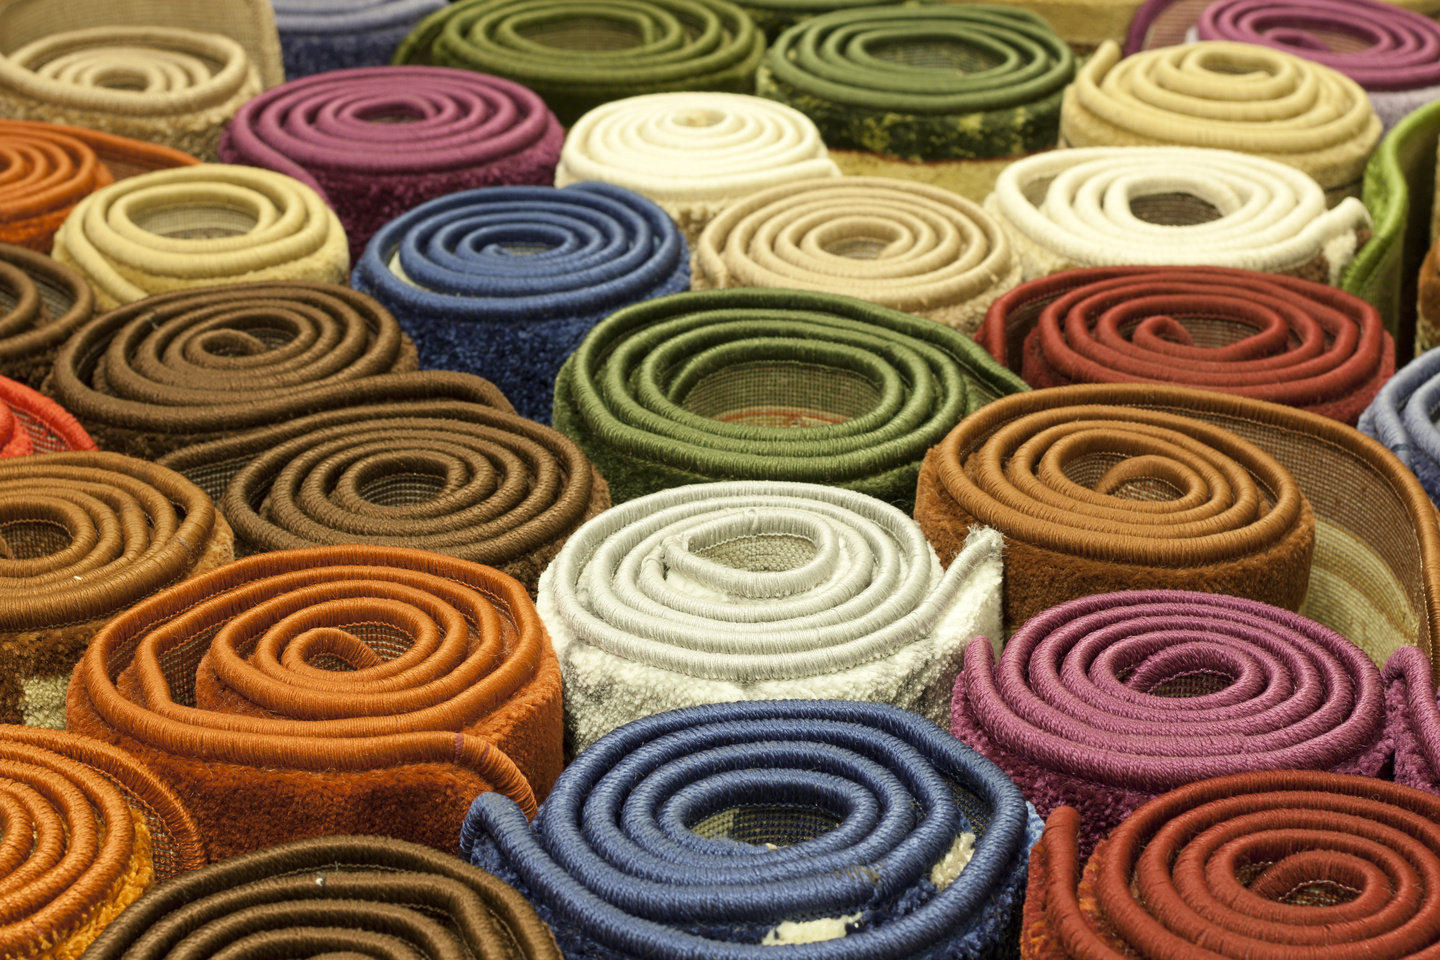 America’s first carpet recycling facility hopes to recycle 36 million pounds of old carpets annually